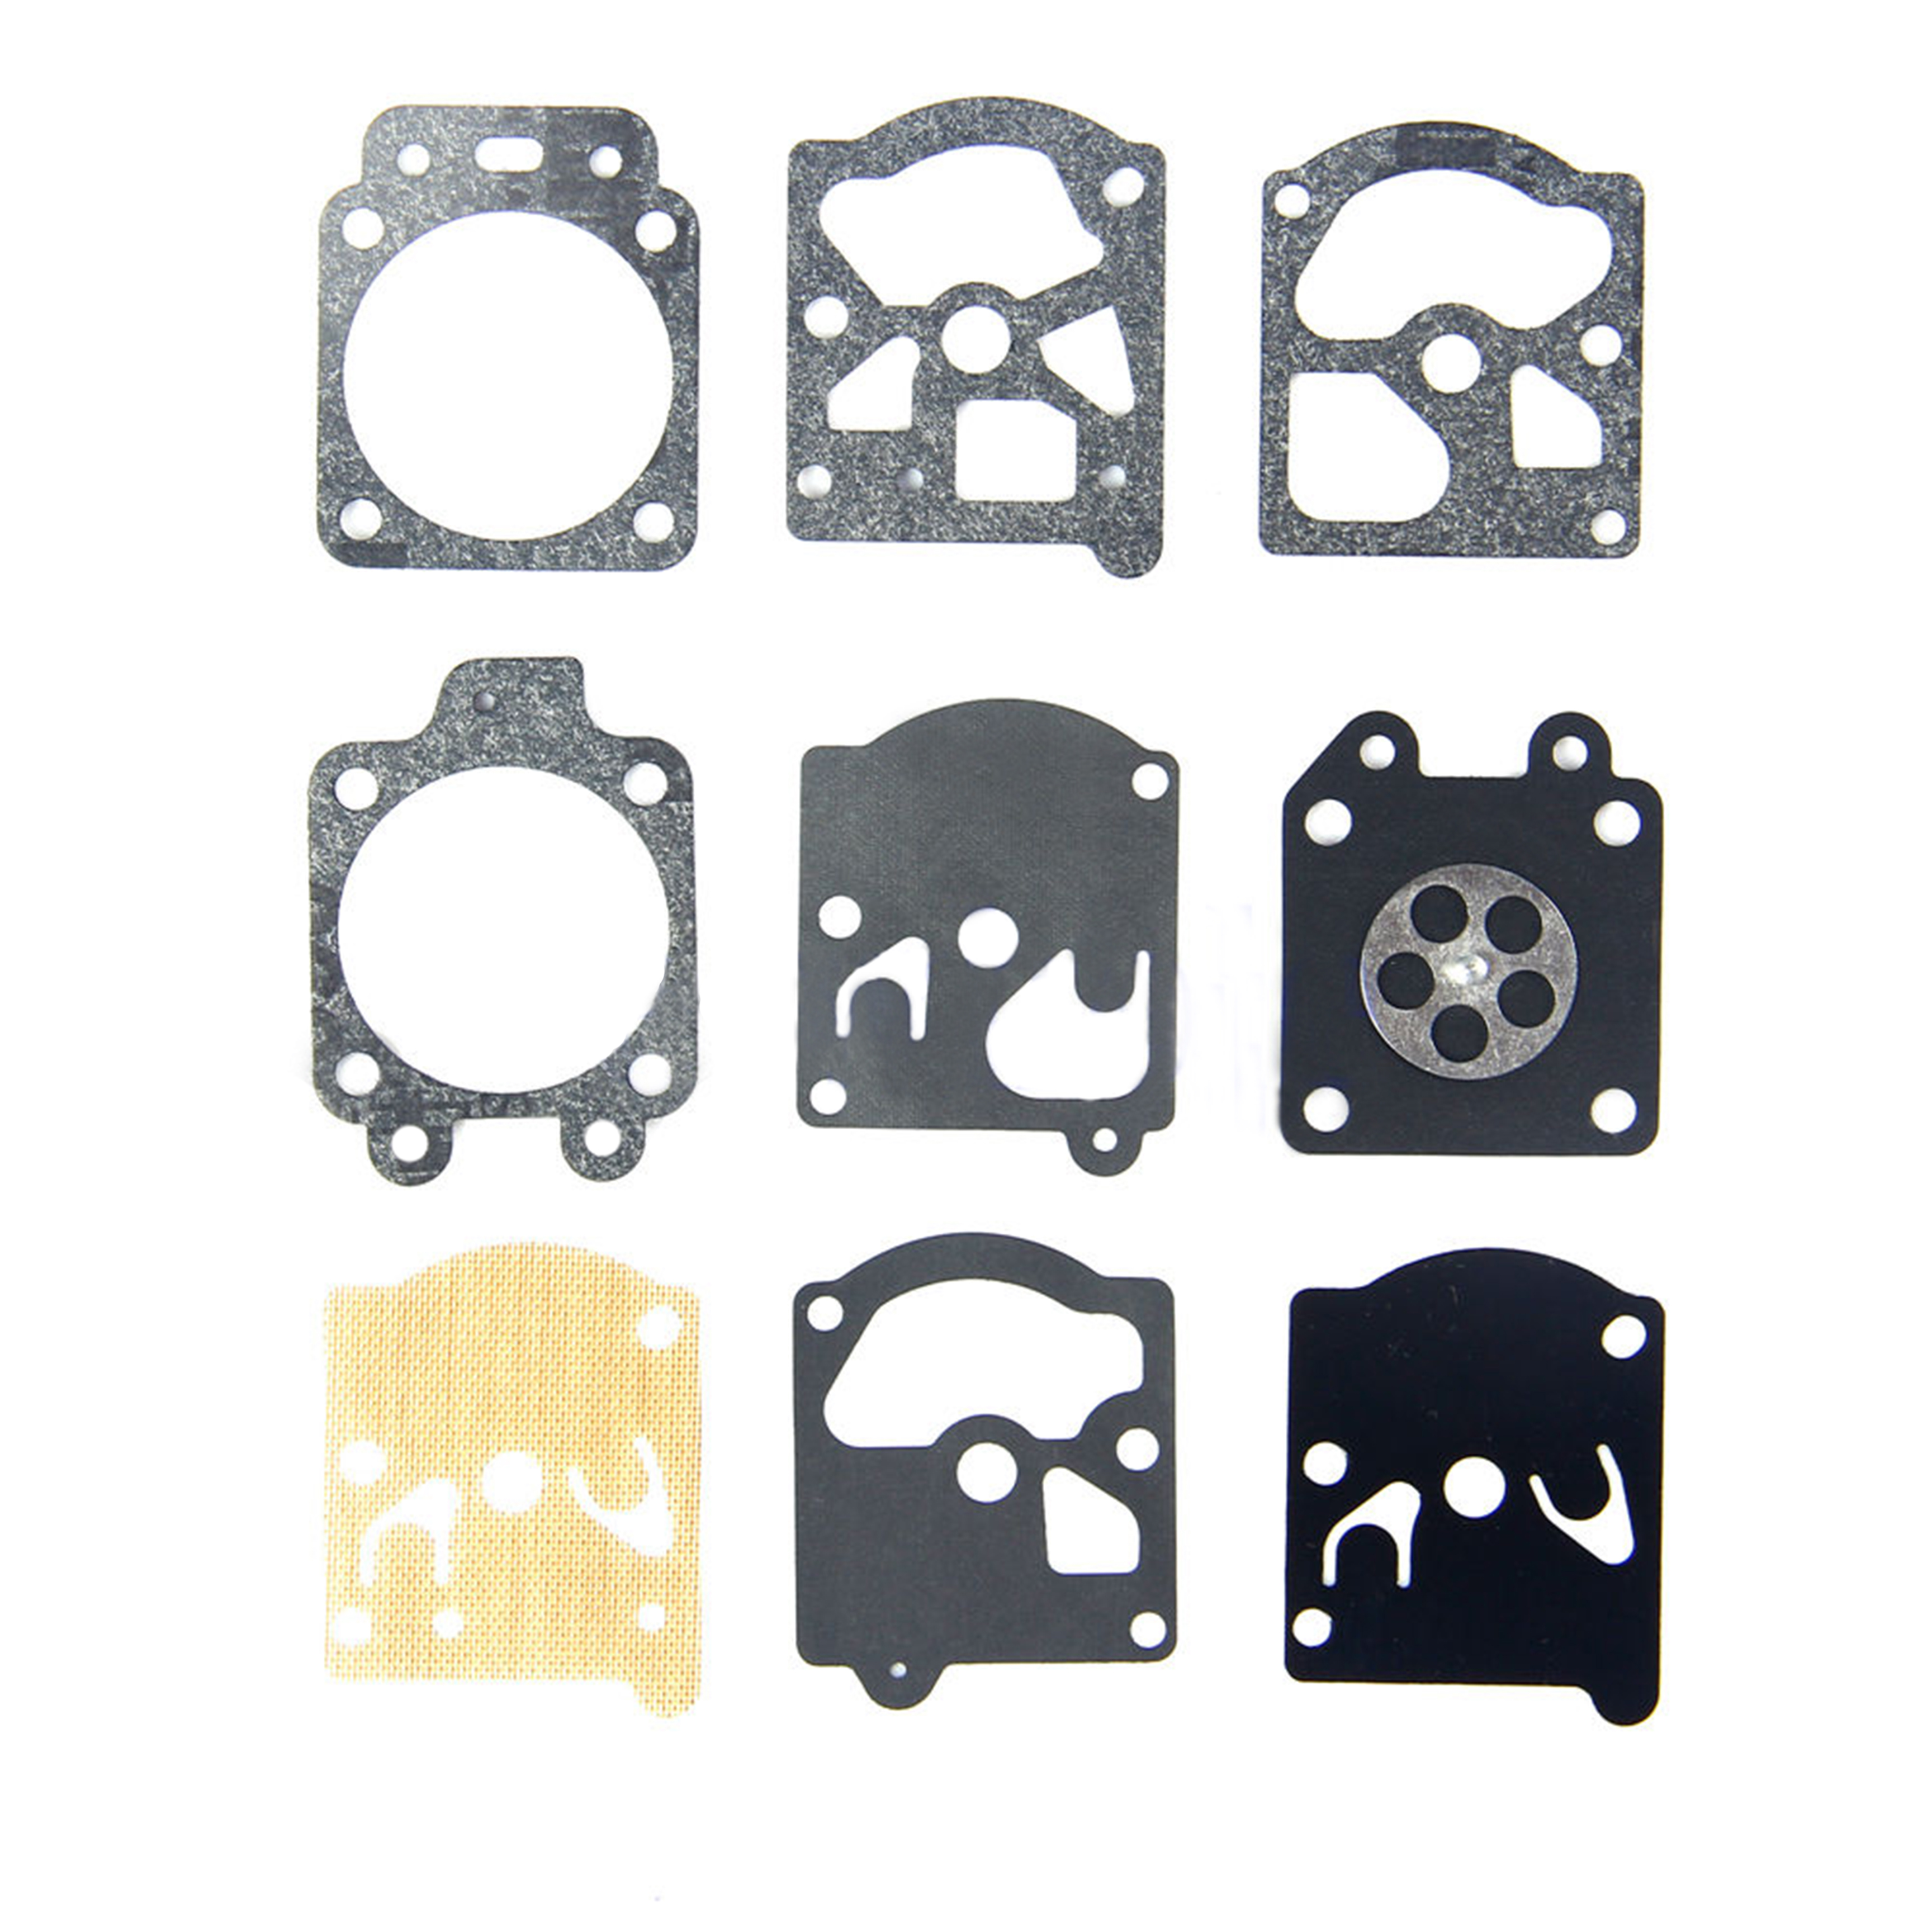 Carburetor Repair Gasket Kit For Stihl MS200T 020T 020 MS200 090 028 FS40 FS44 FS85 FS90 FS586 FS88 FS106 FS 180 McCulloch 4600 4700 4900 492 Husqvarna 50R 26L 232R 235R 225R 240 Partner 330 P500 and Compatible With Walbro K10-WAT WA & WT Series